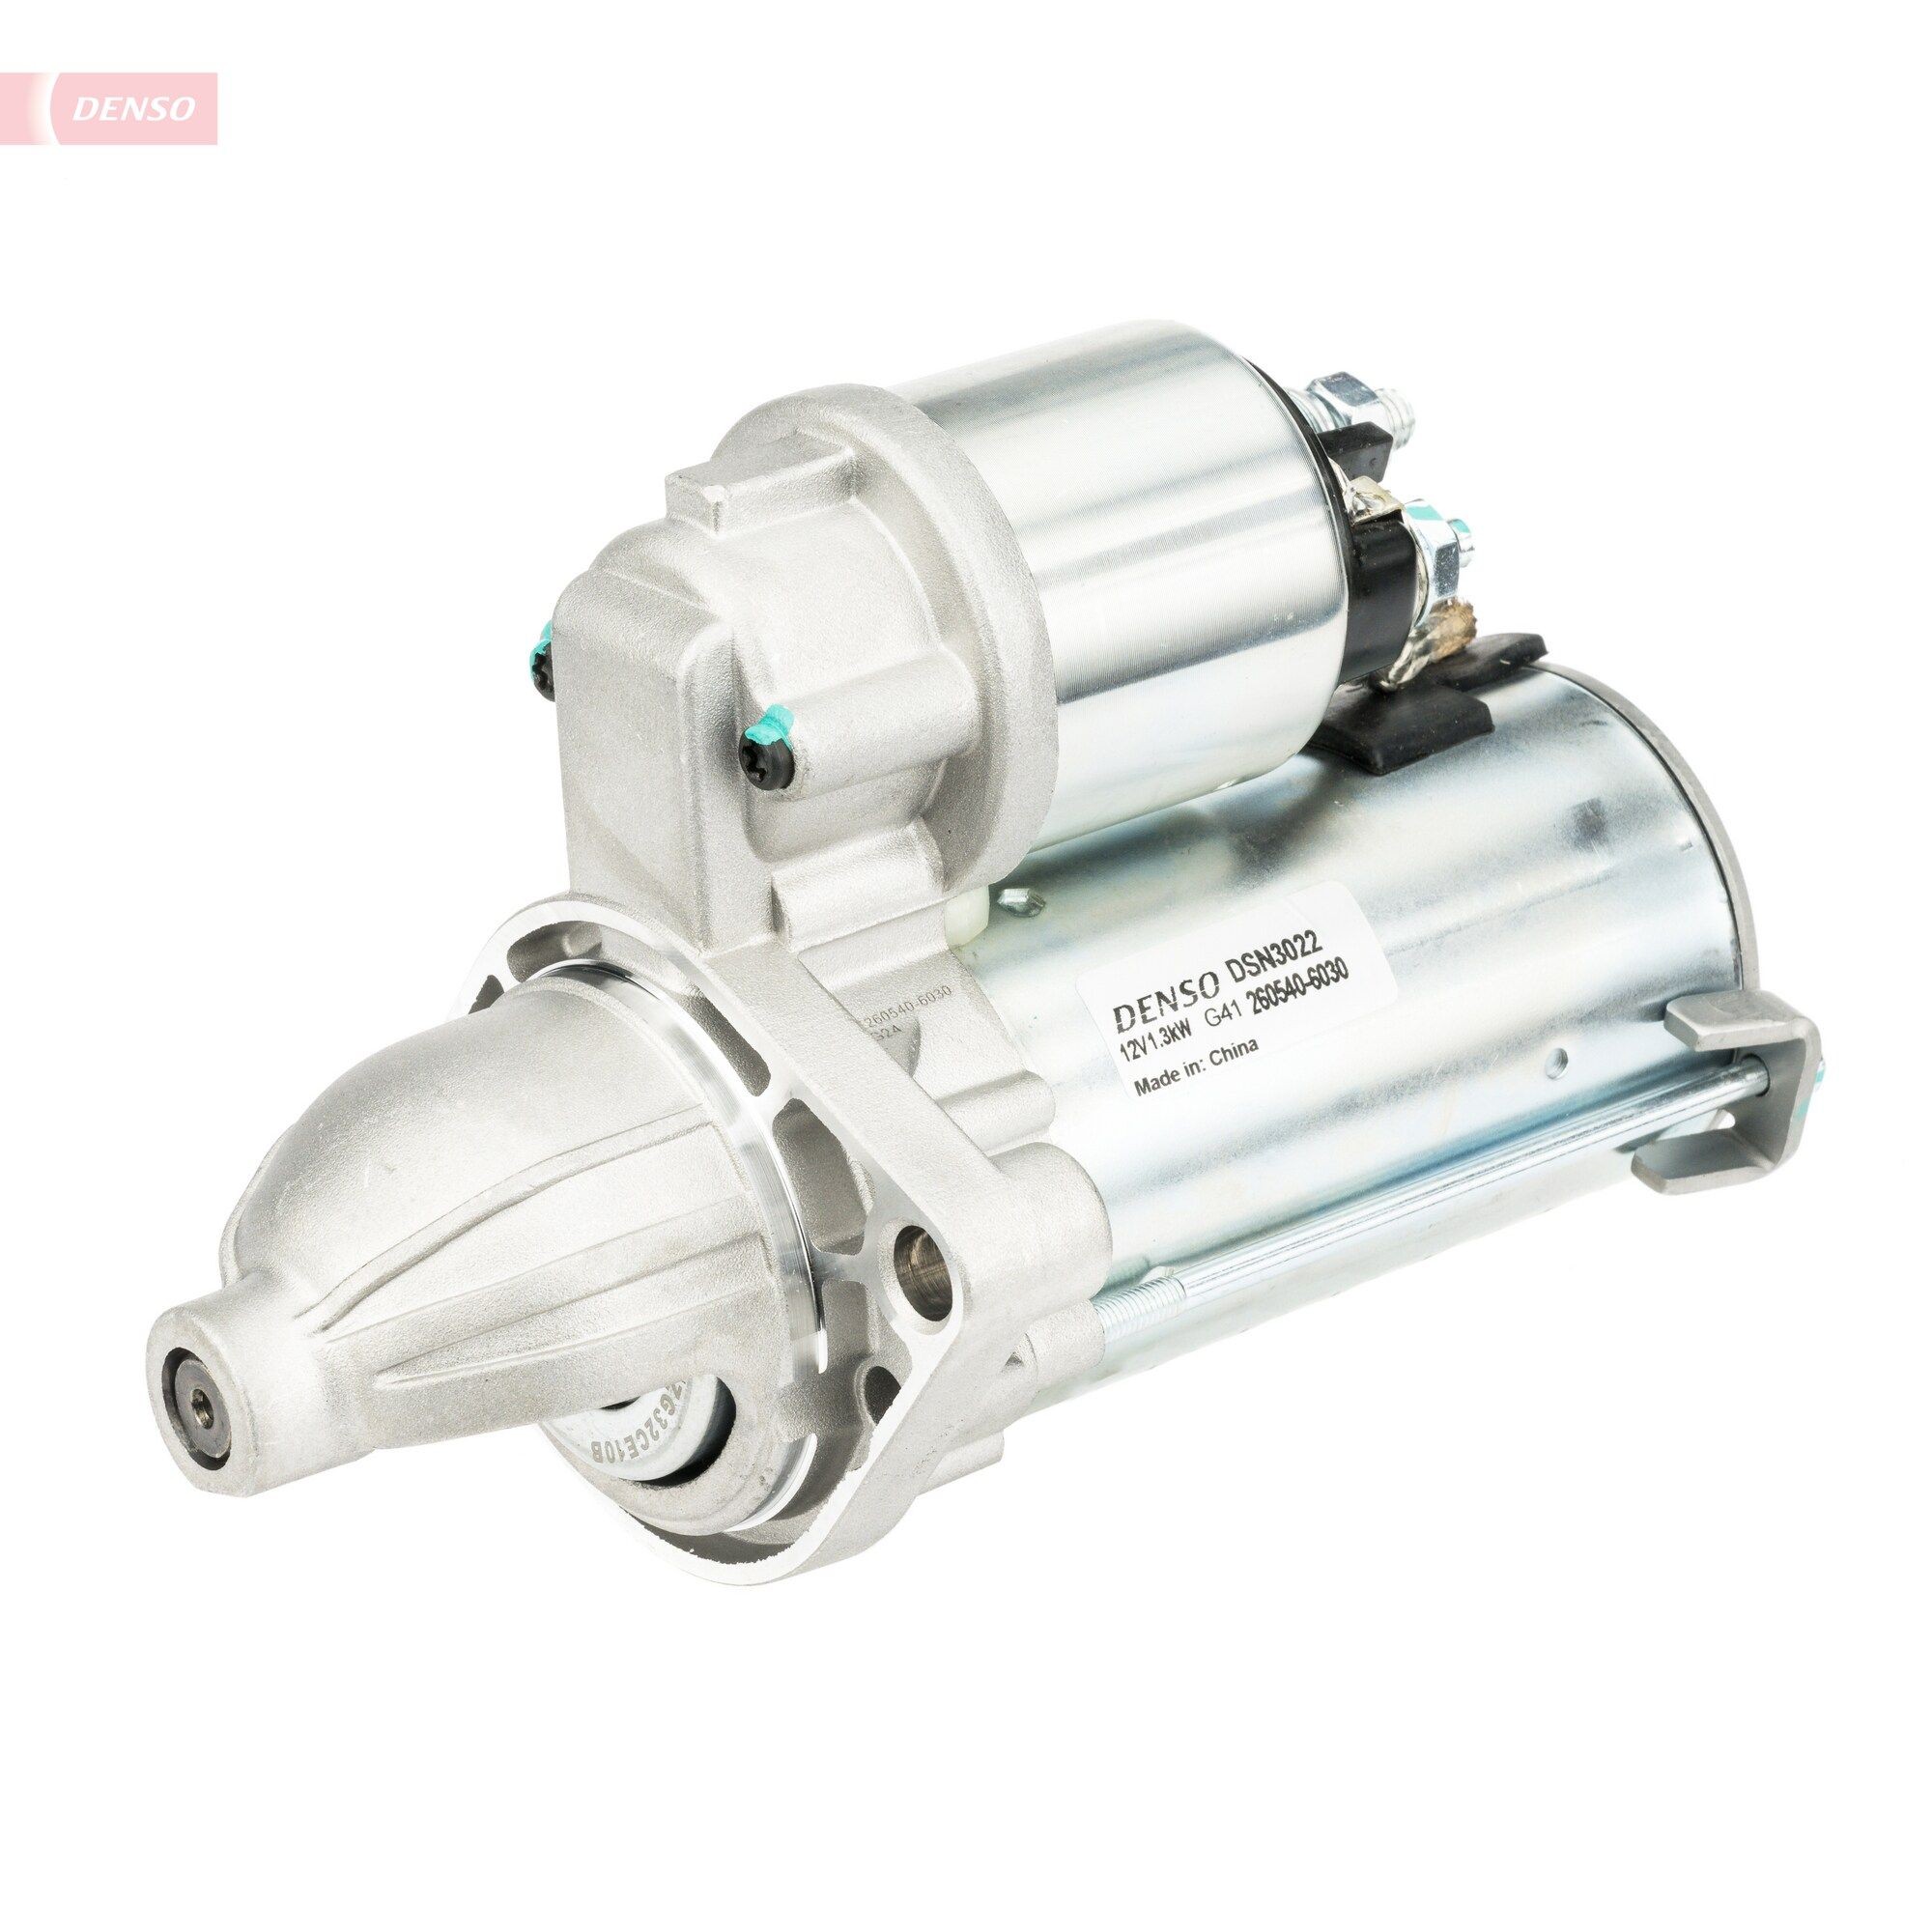 DENSO DSN3022 Starter motor PEUGEOT experience and price